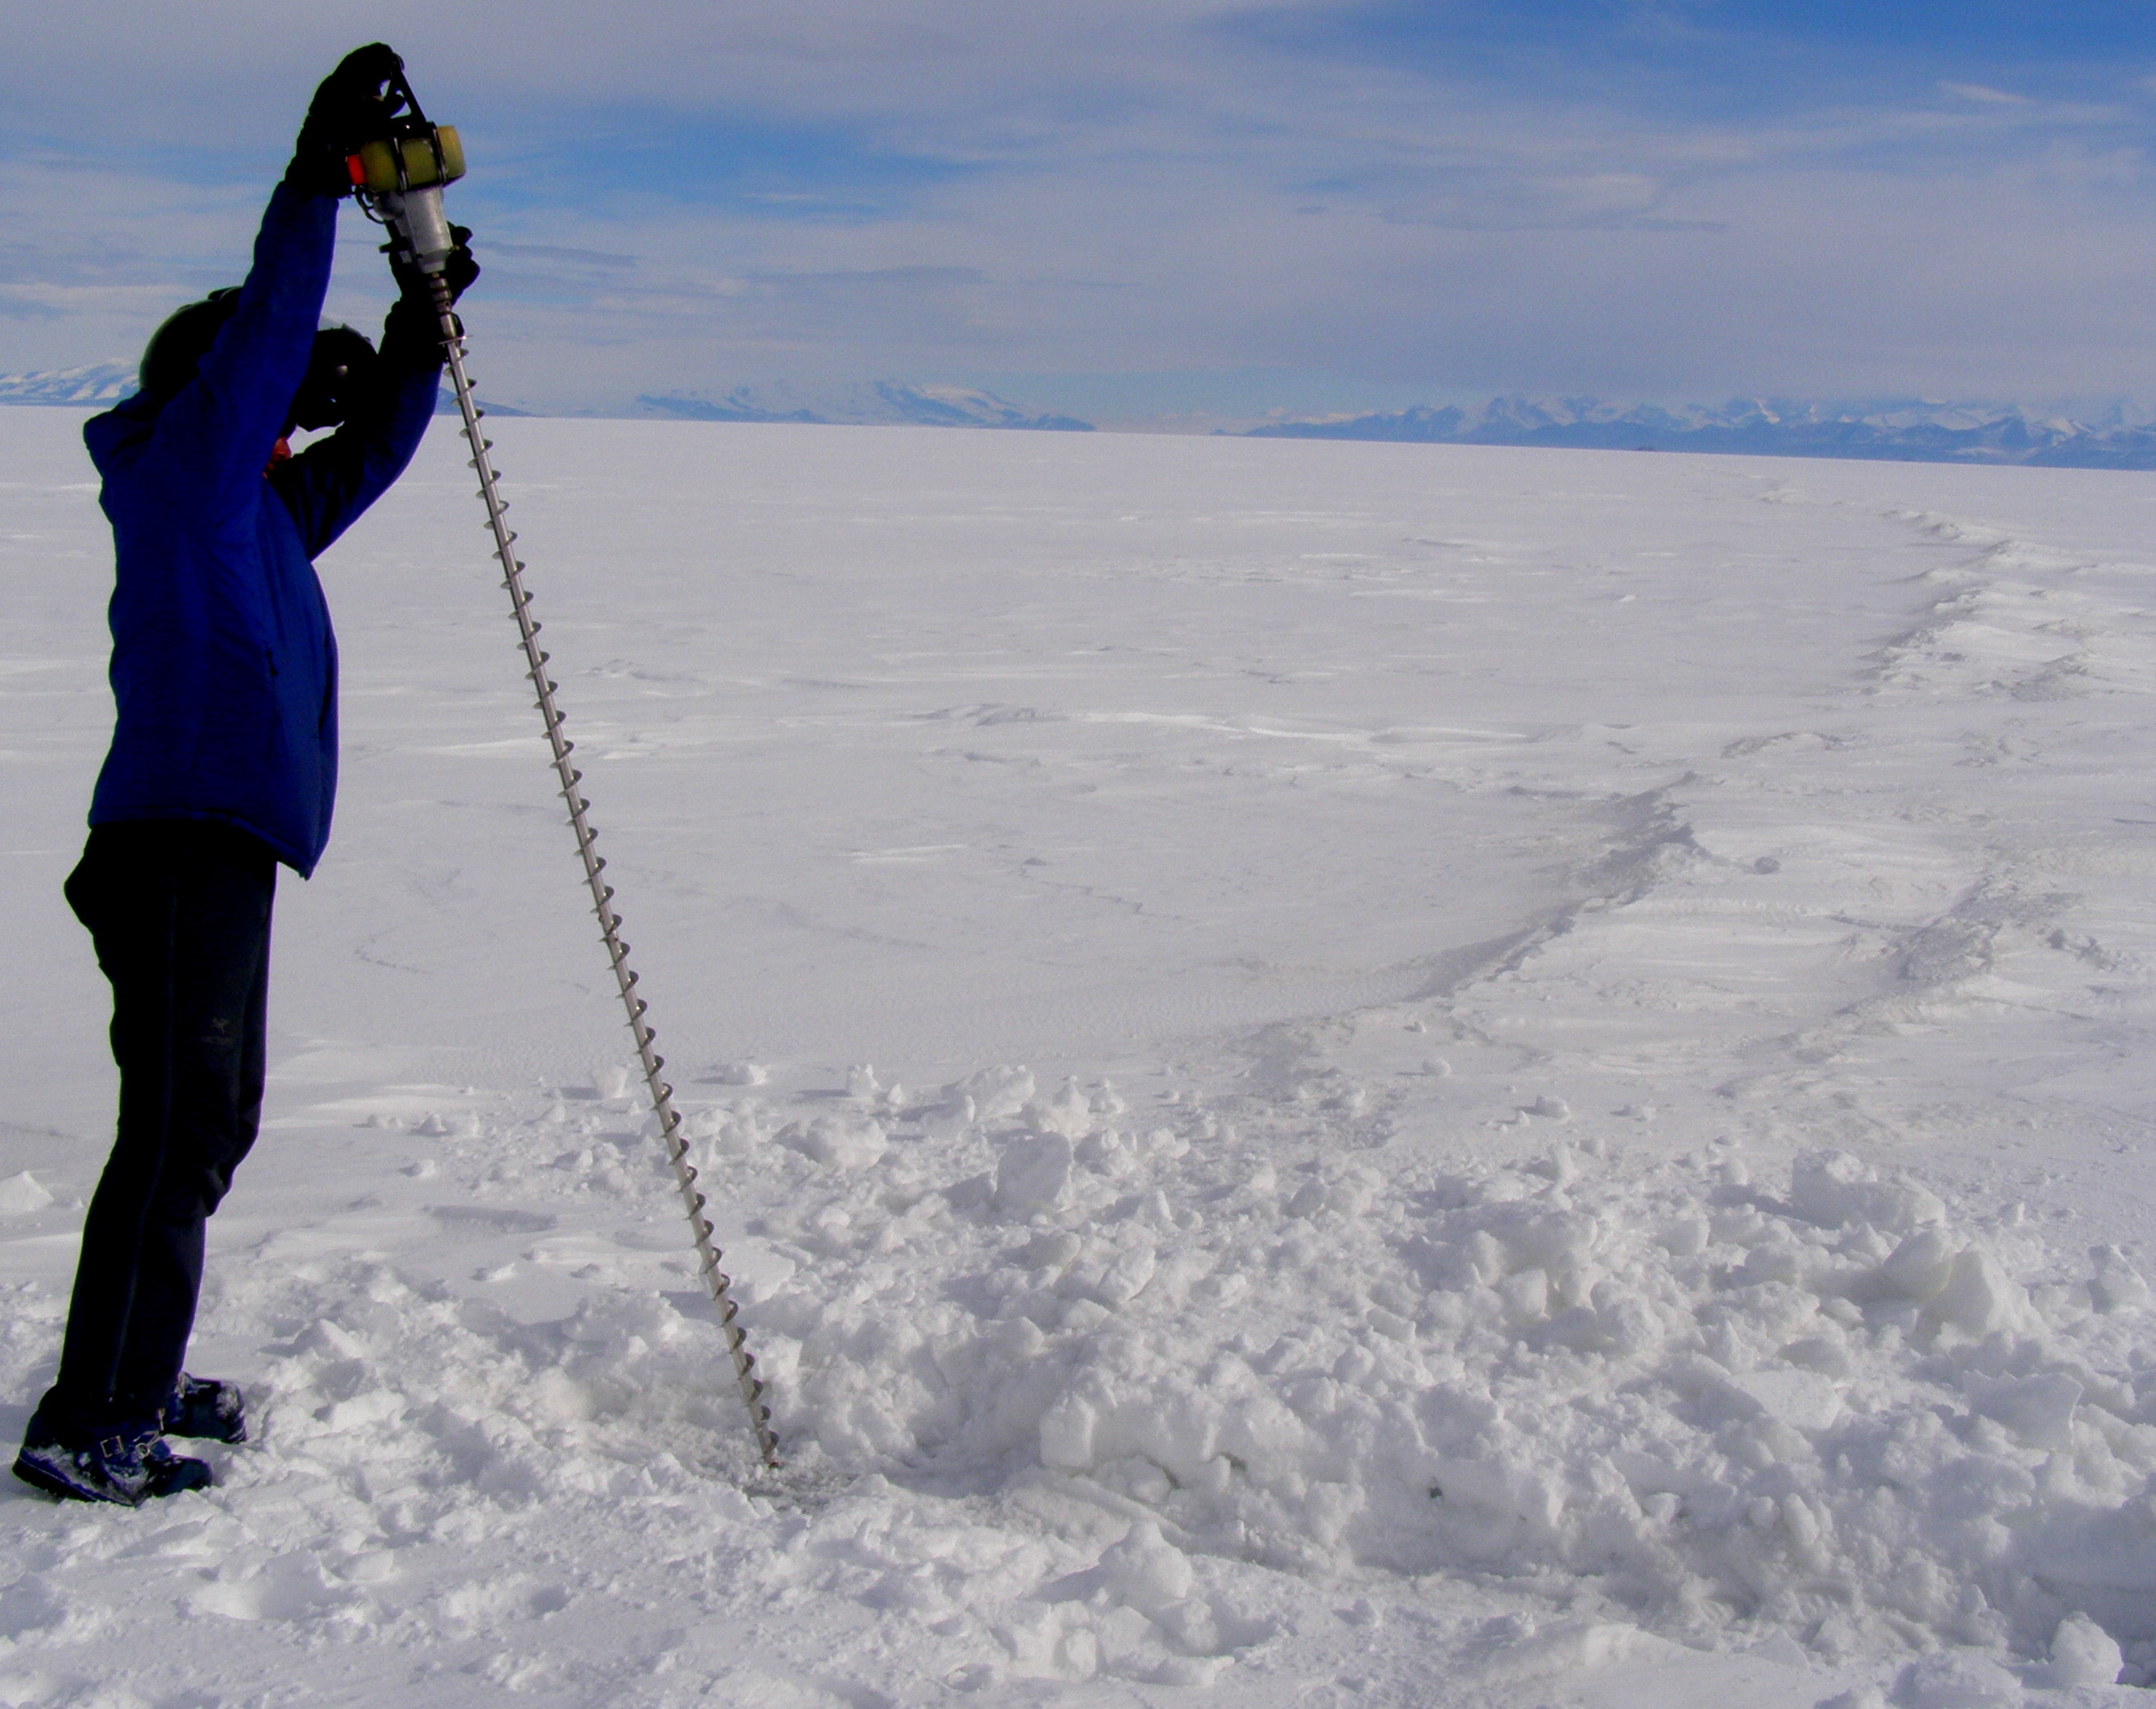 Matt drills to test the ice thickness across a crack